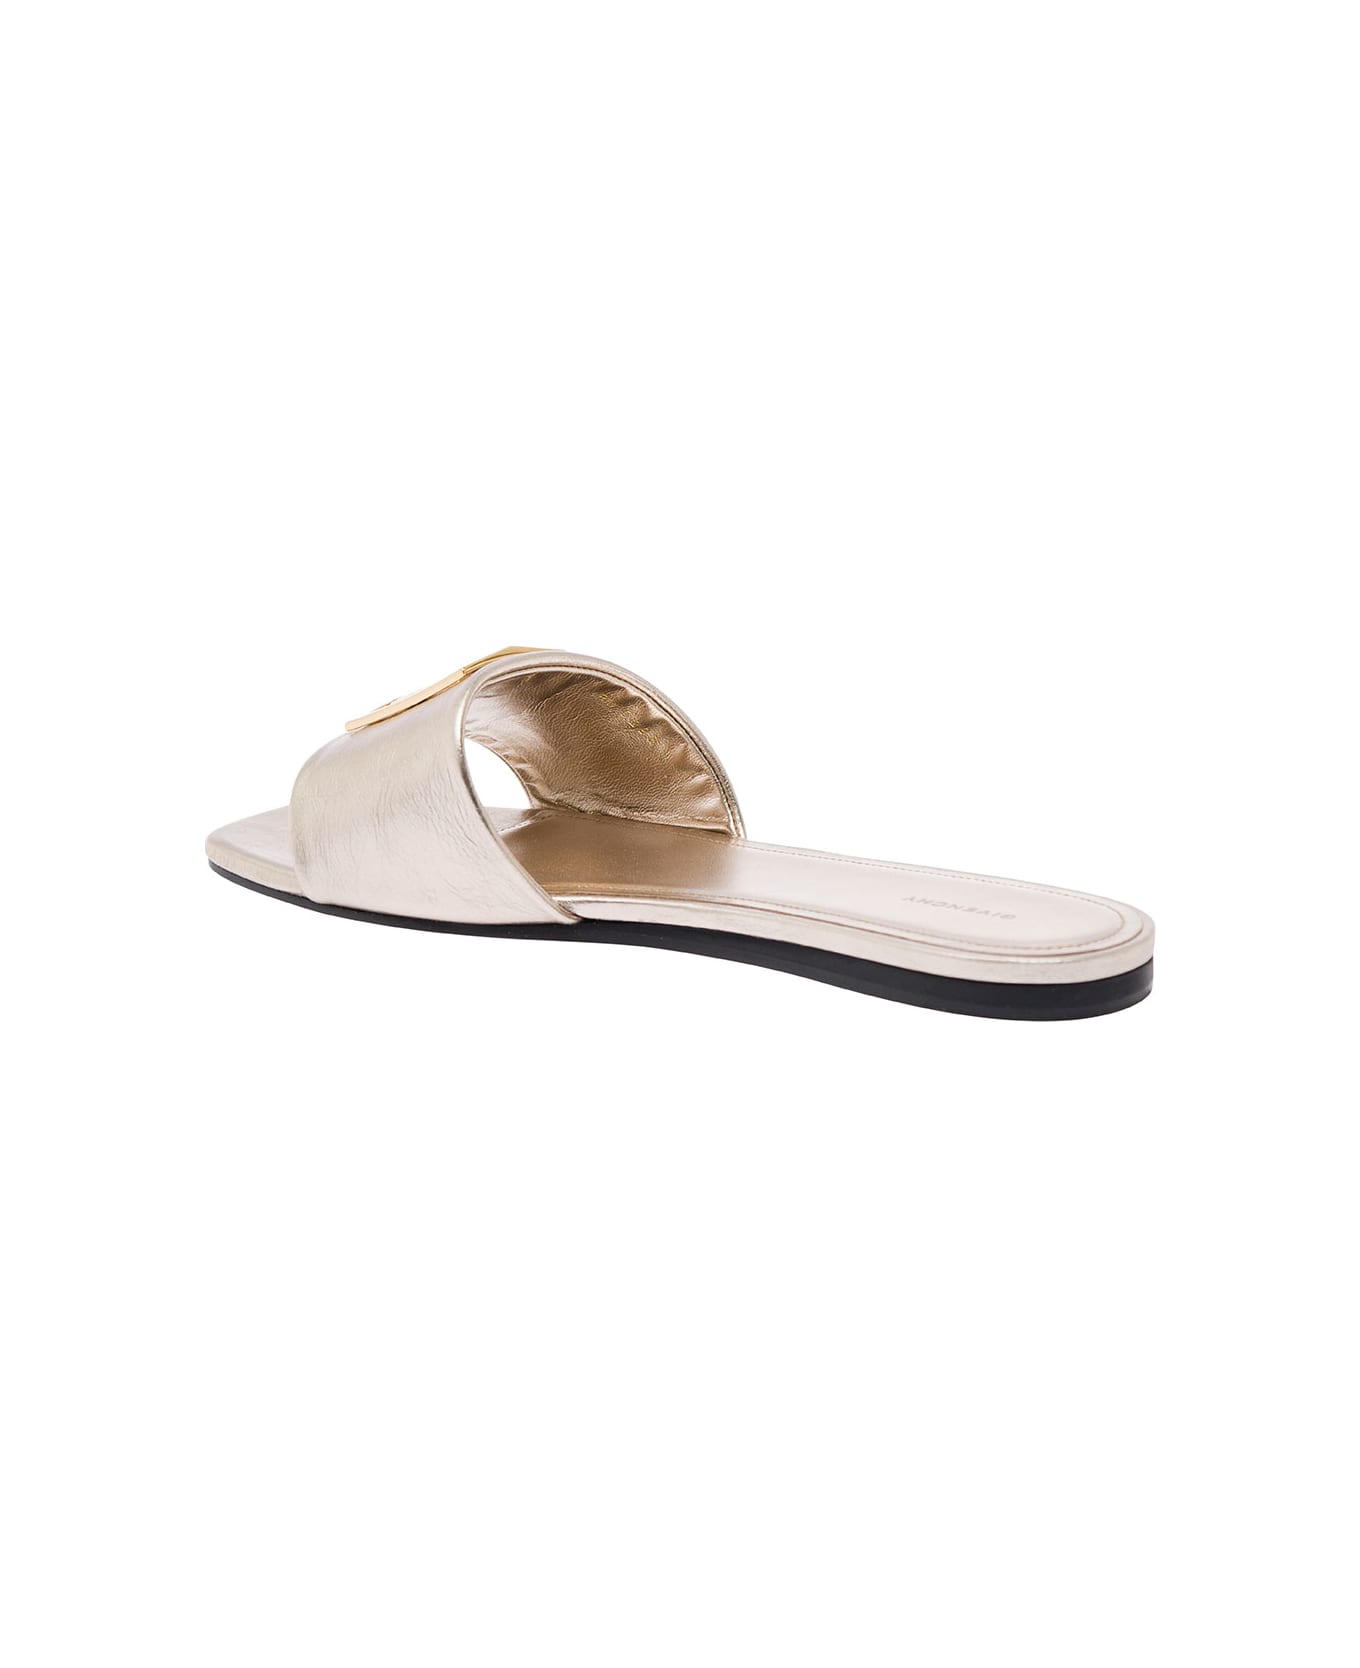 Givenchy Silver Flat Sandals With 4g Detail In Metallic Leather Woman - DUSTY GOLD